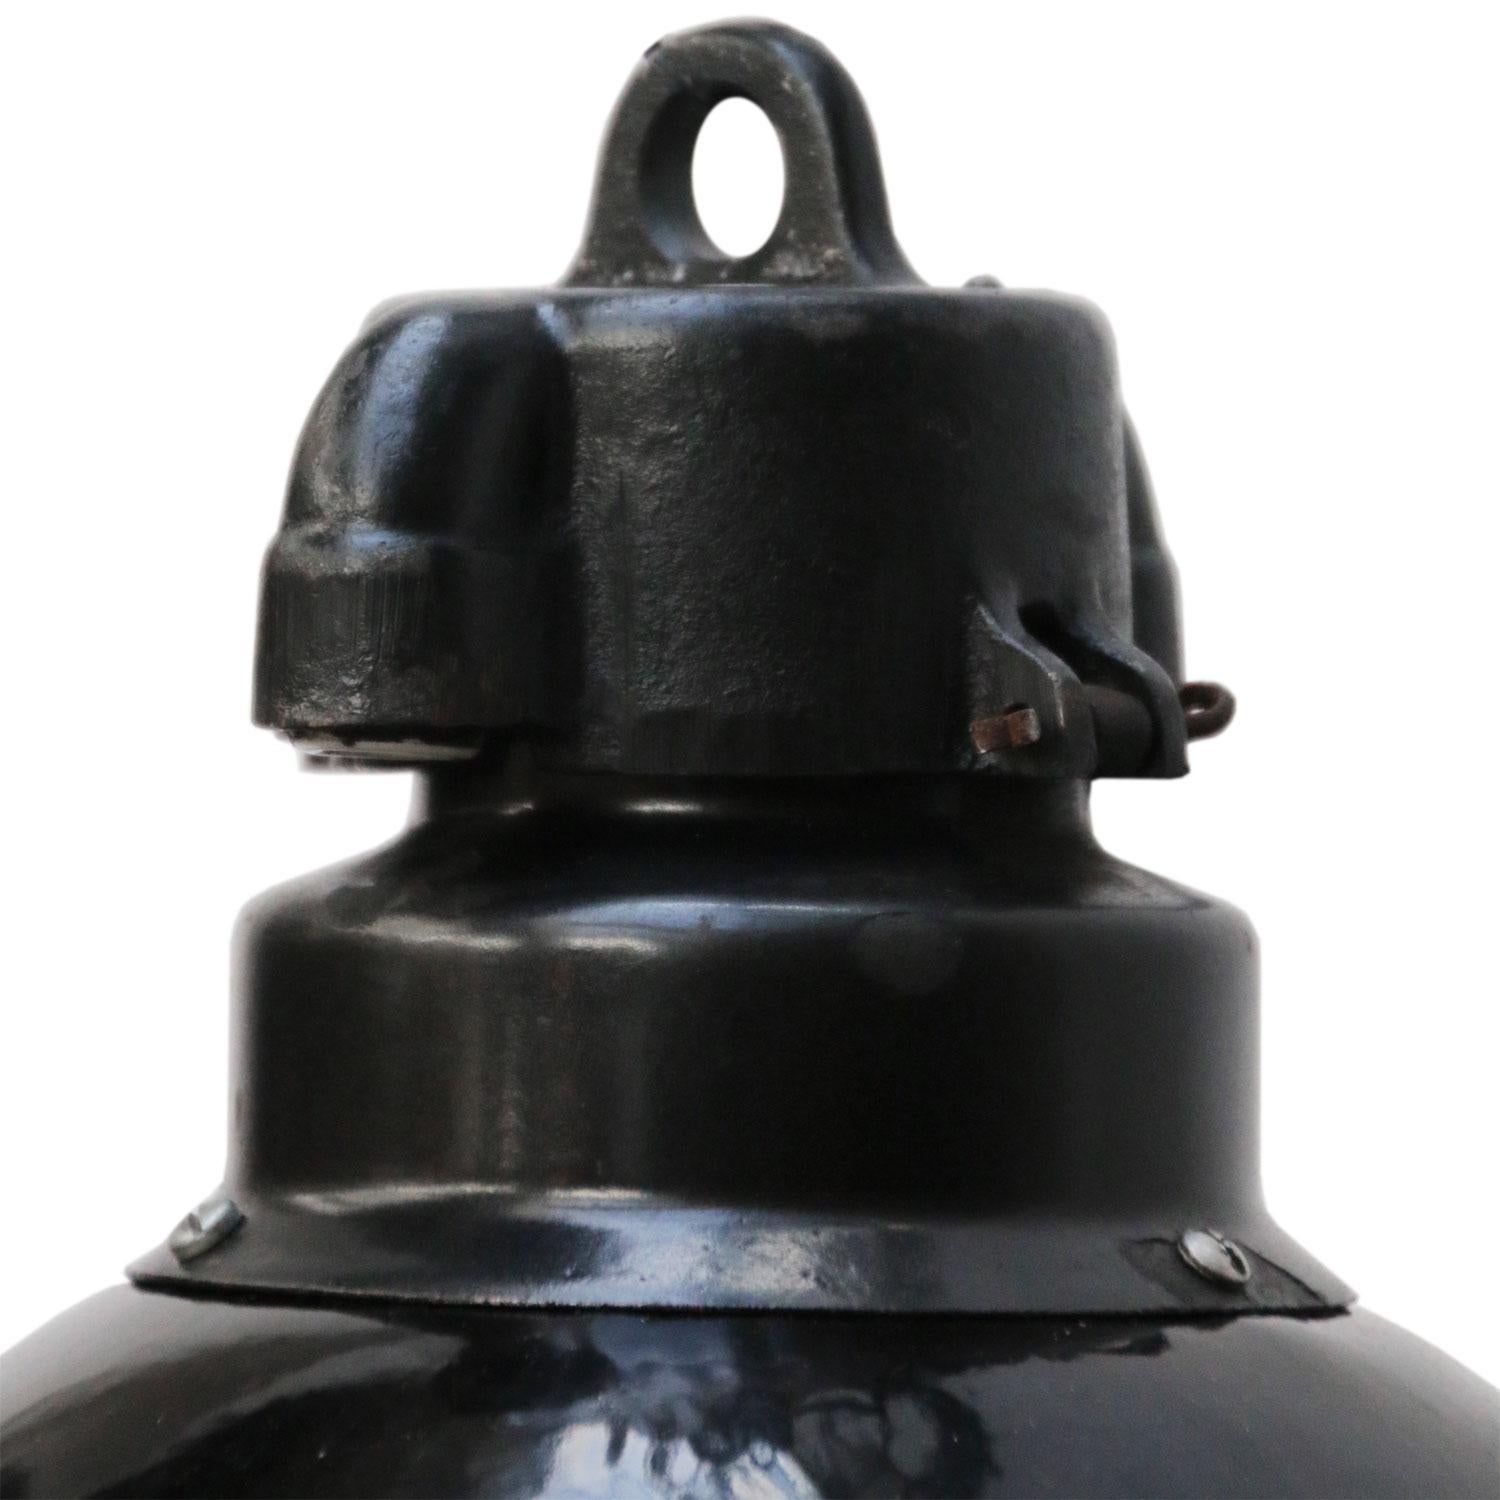 Bauhaus Classic from the 1930s. Black enamel Industrial hanging lamp.
Cast iron top. White interior.

Weight: 1.7 kg / 3.7 lb

Priced per individual item. All lamps have been made suitable by international standards for incandescent light bulbs,